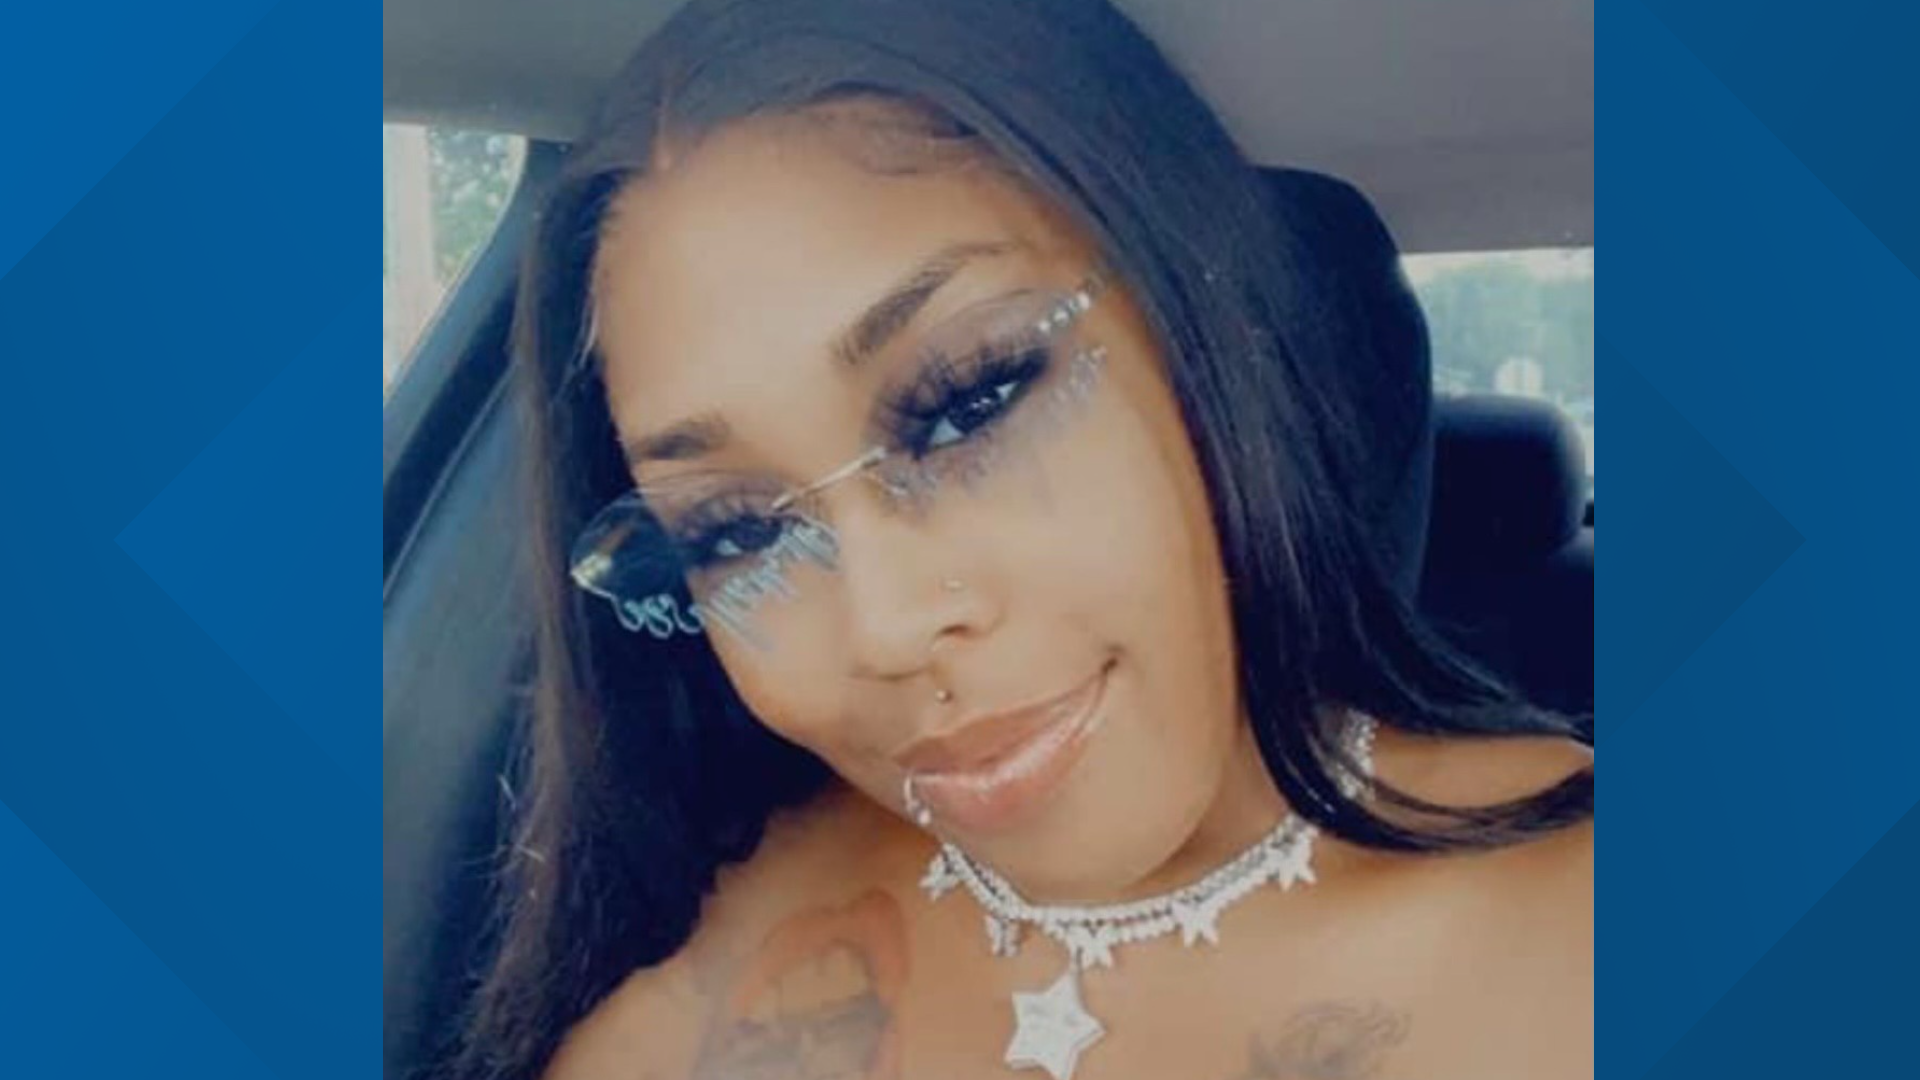 The team representing Breonna Taylor's family announced they will also be helping the family of a Louisville woman who died while in custody in Seymour, Indiana.